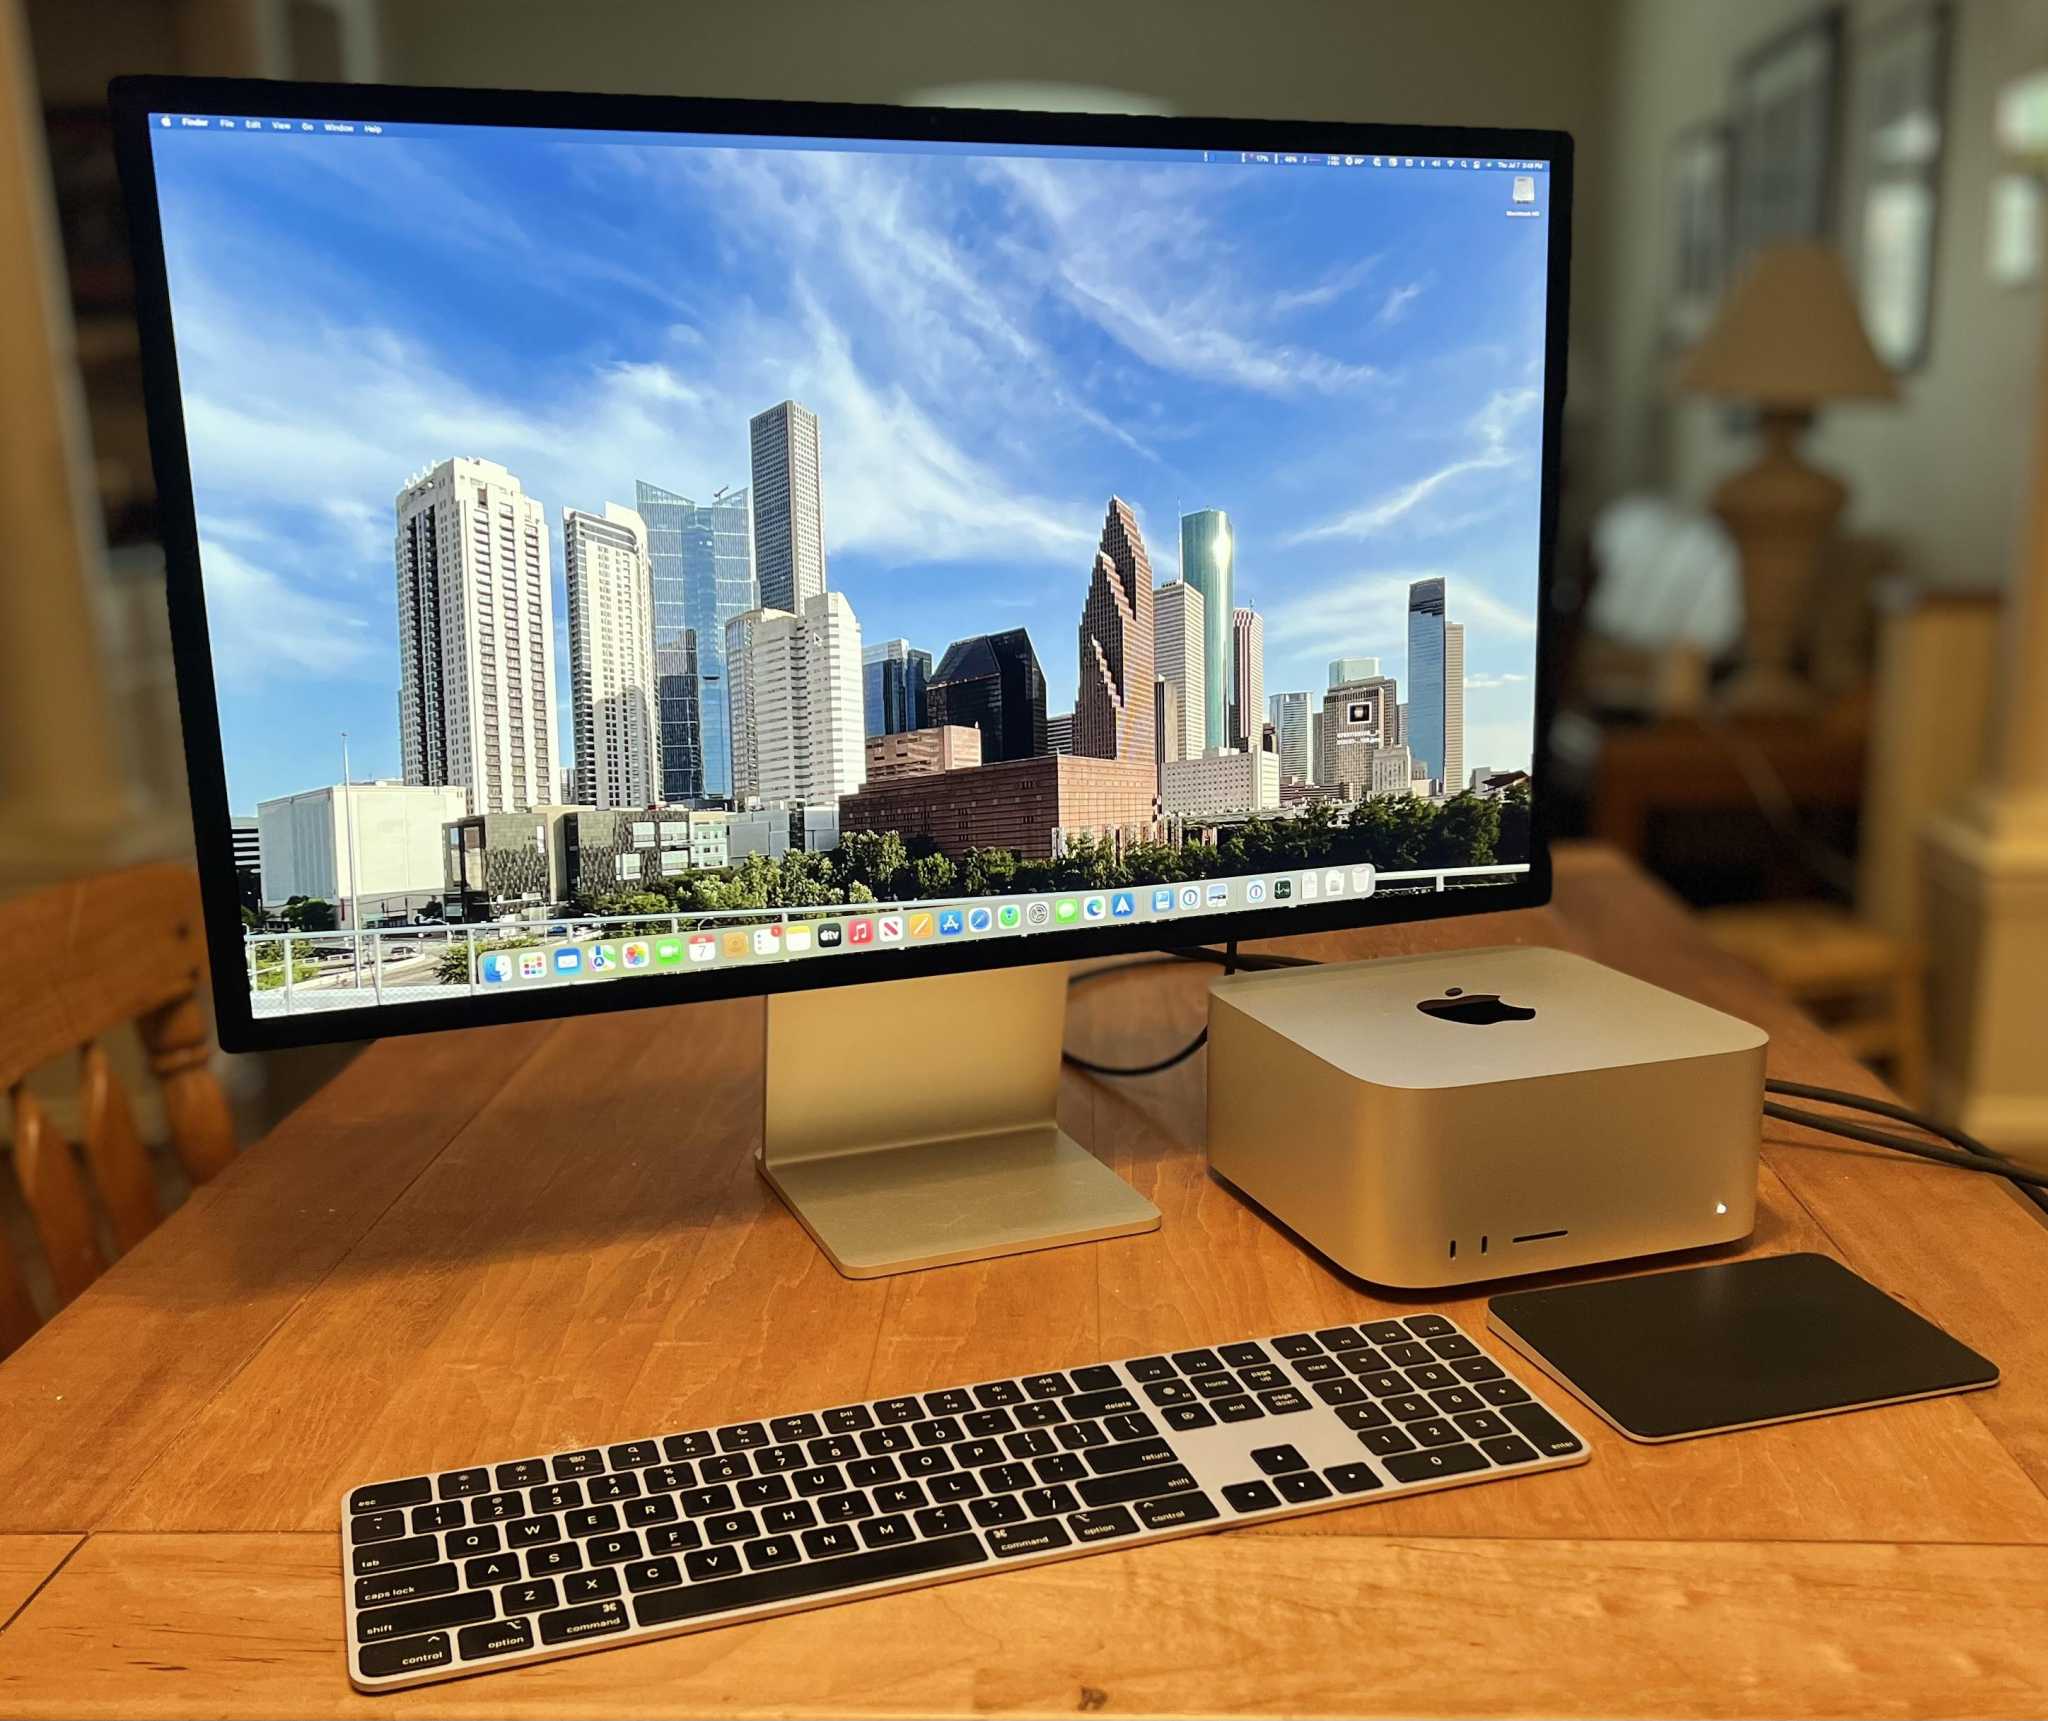 Silverman: Apple's Mac Studio shows the power of its M1 chips, but